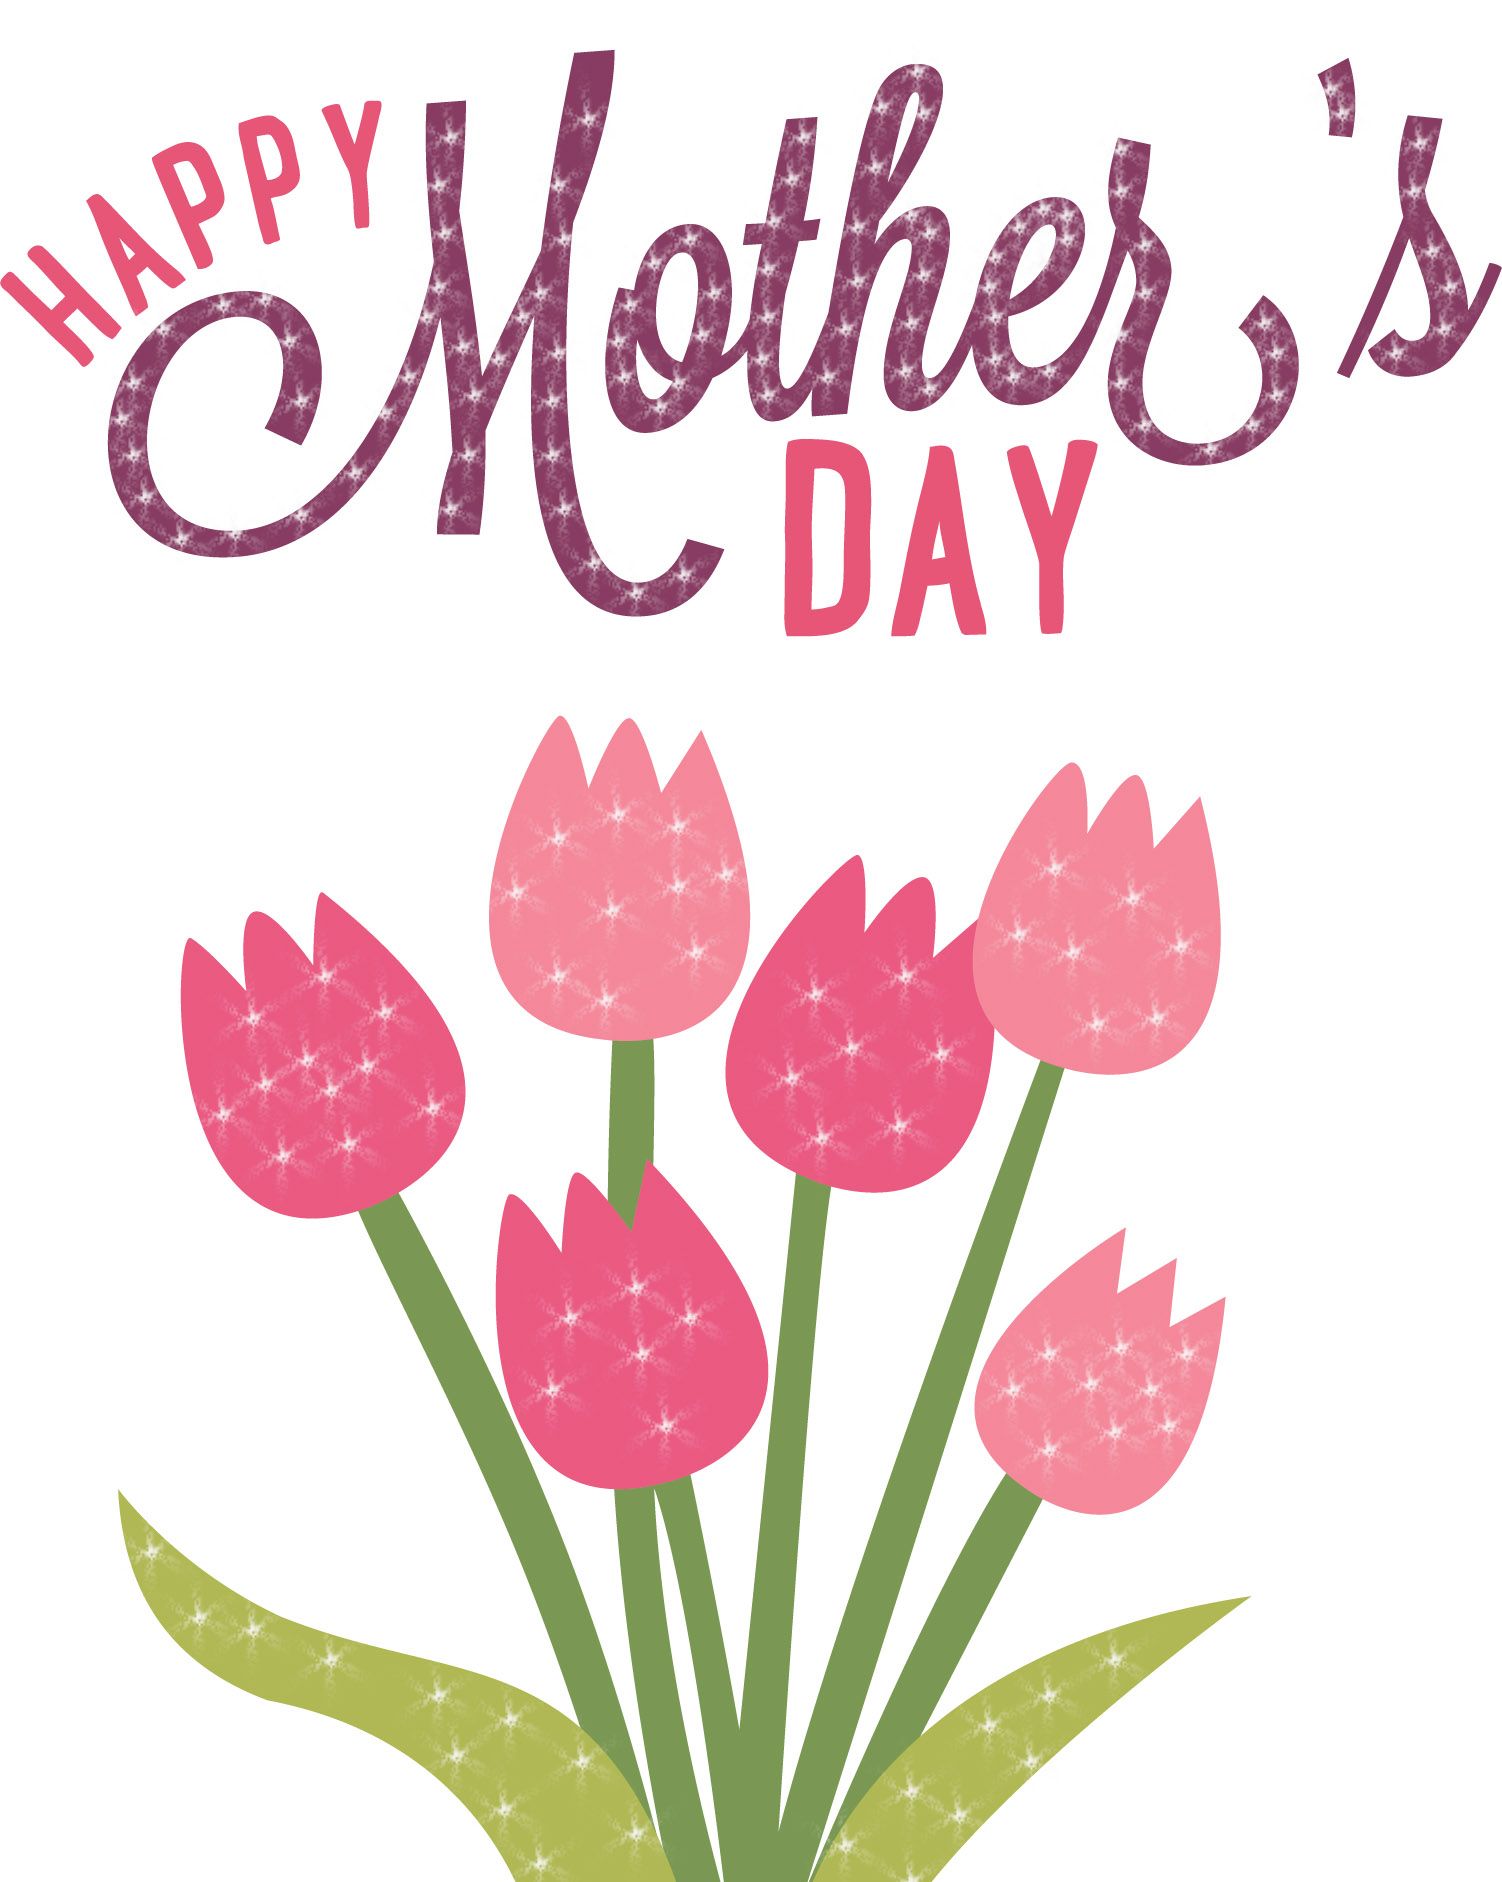 Happy Mothers Day 2018 HD Image Car Wallpaper